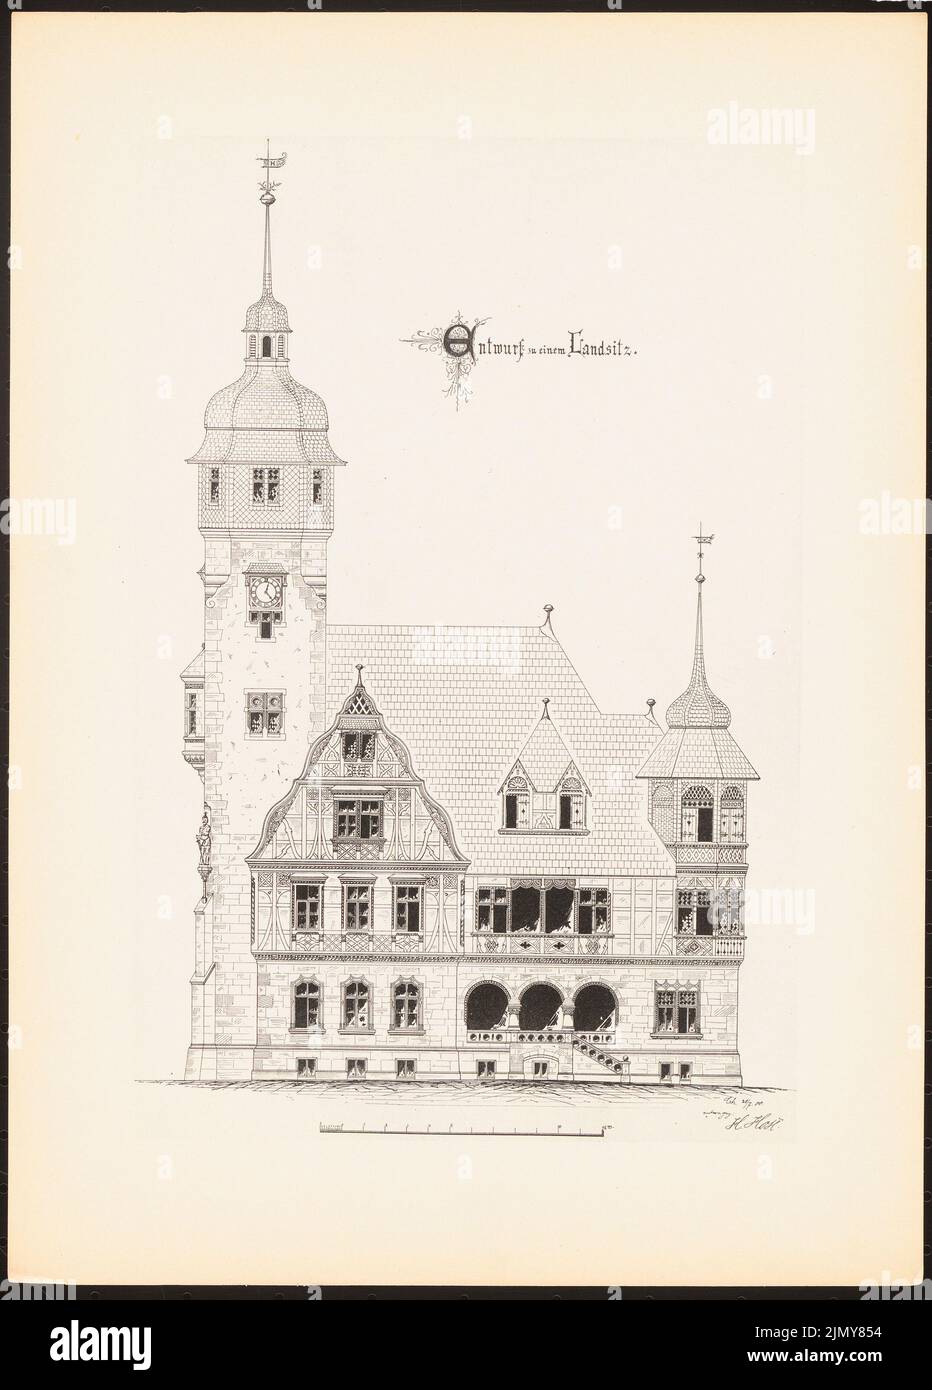 N.N., country office. (From: Prints of seminar works by the Royal Technical University of Berlin, Vol. II) (July 20, 1900): View. Pressure on paper, 33.9 x 24.4 cm (including scan edges) Stock Photo